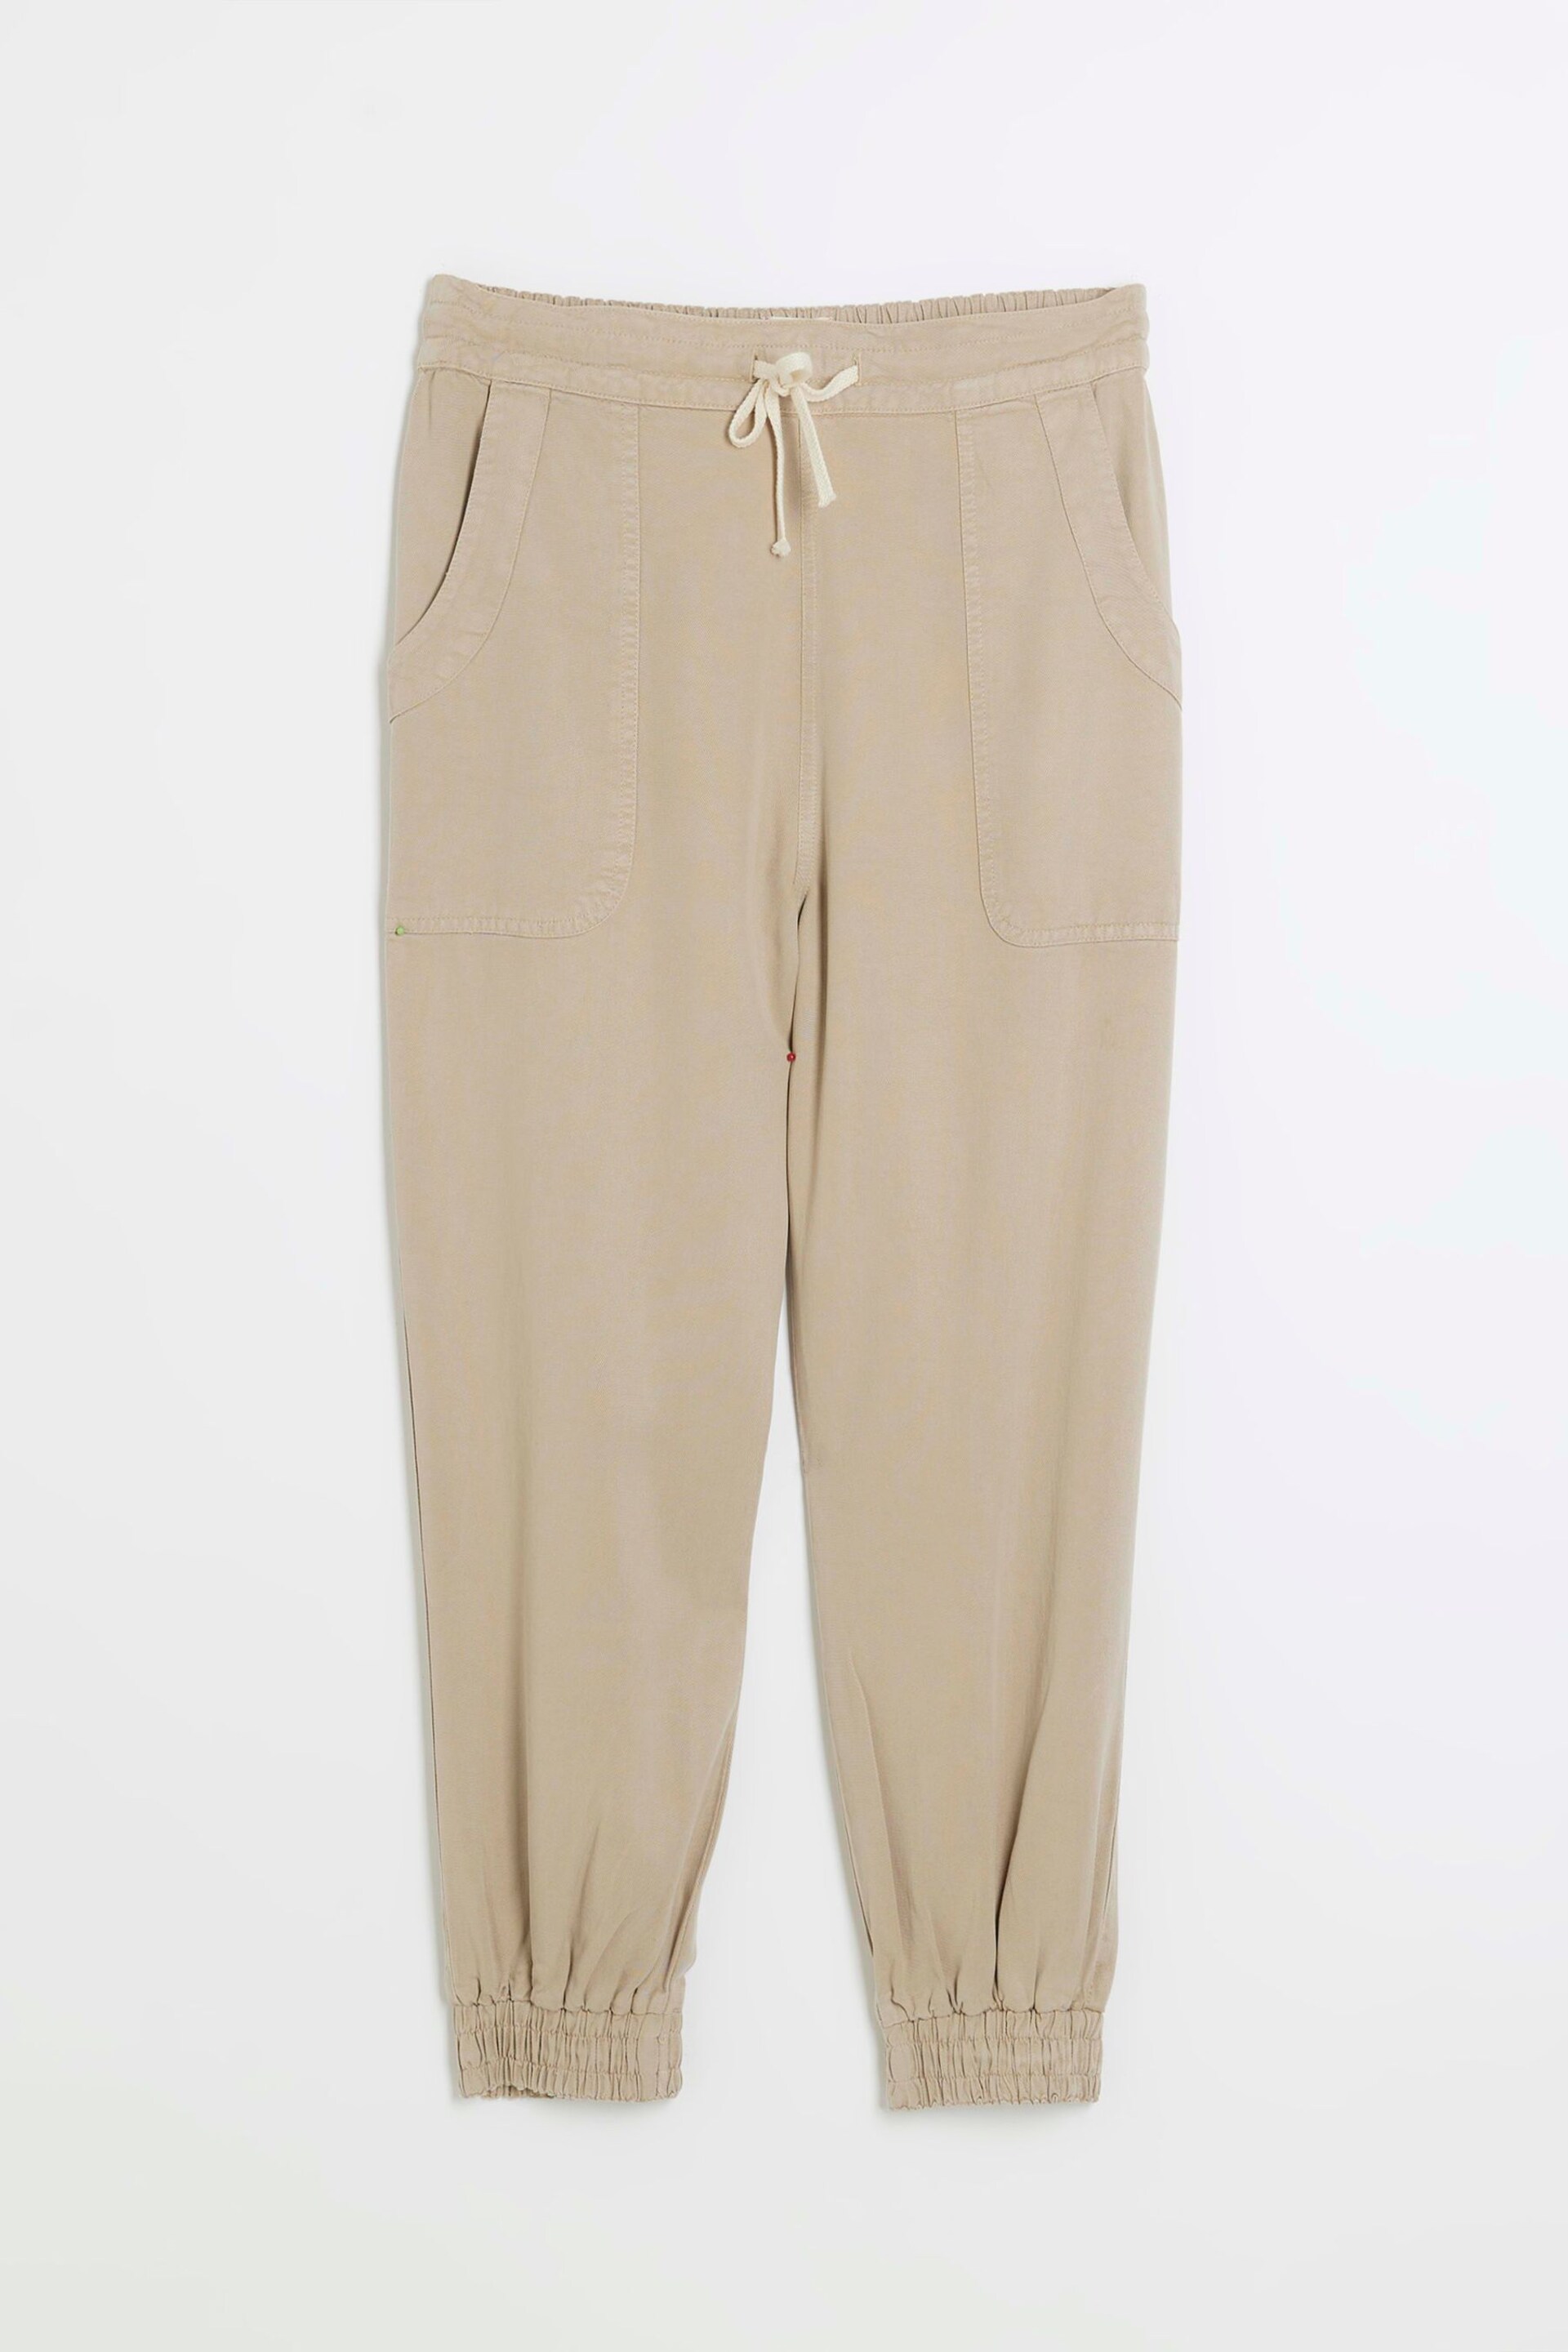 River Island Brown Petite Cuffed Easy Joggers - Image 5 of 6